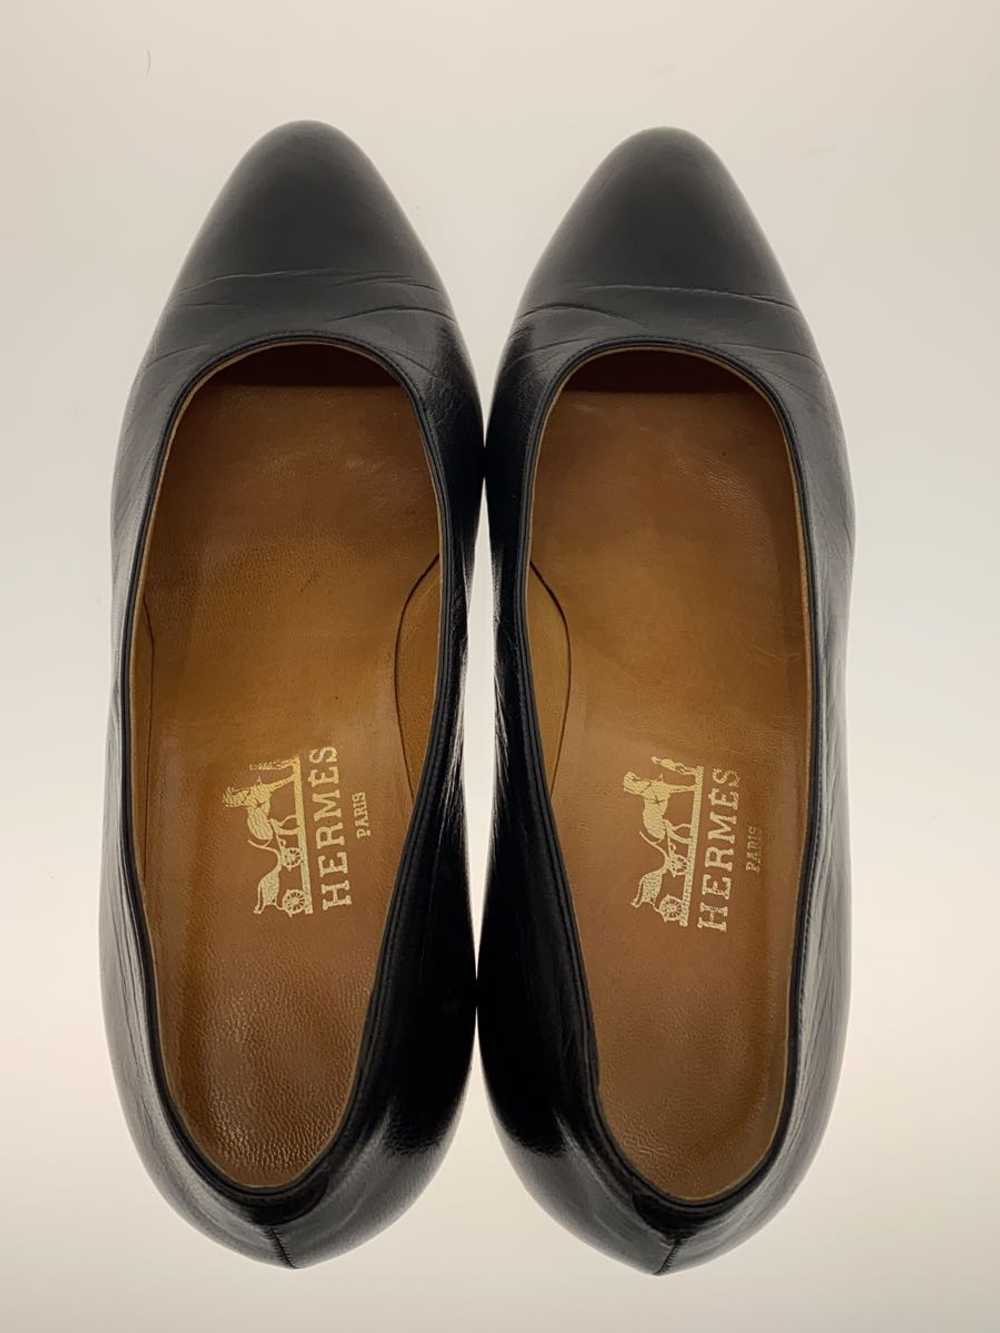 Hermes Pumps/36.5/Black/Scratches/Scratches On To… - image 3